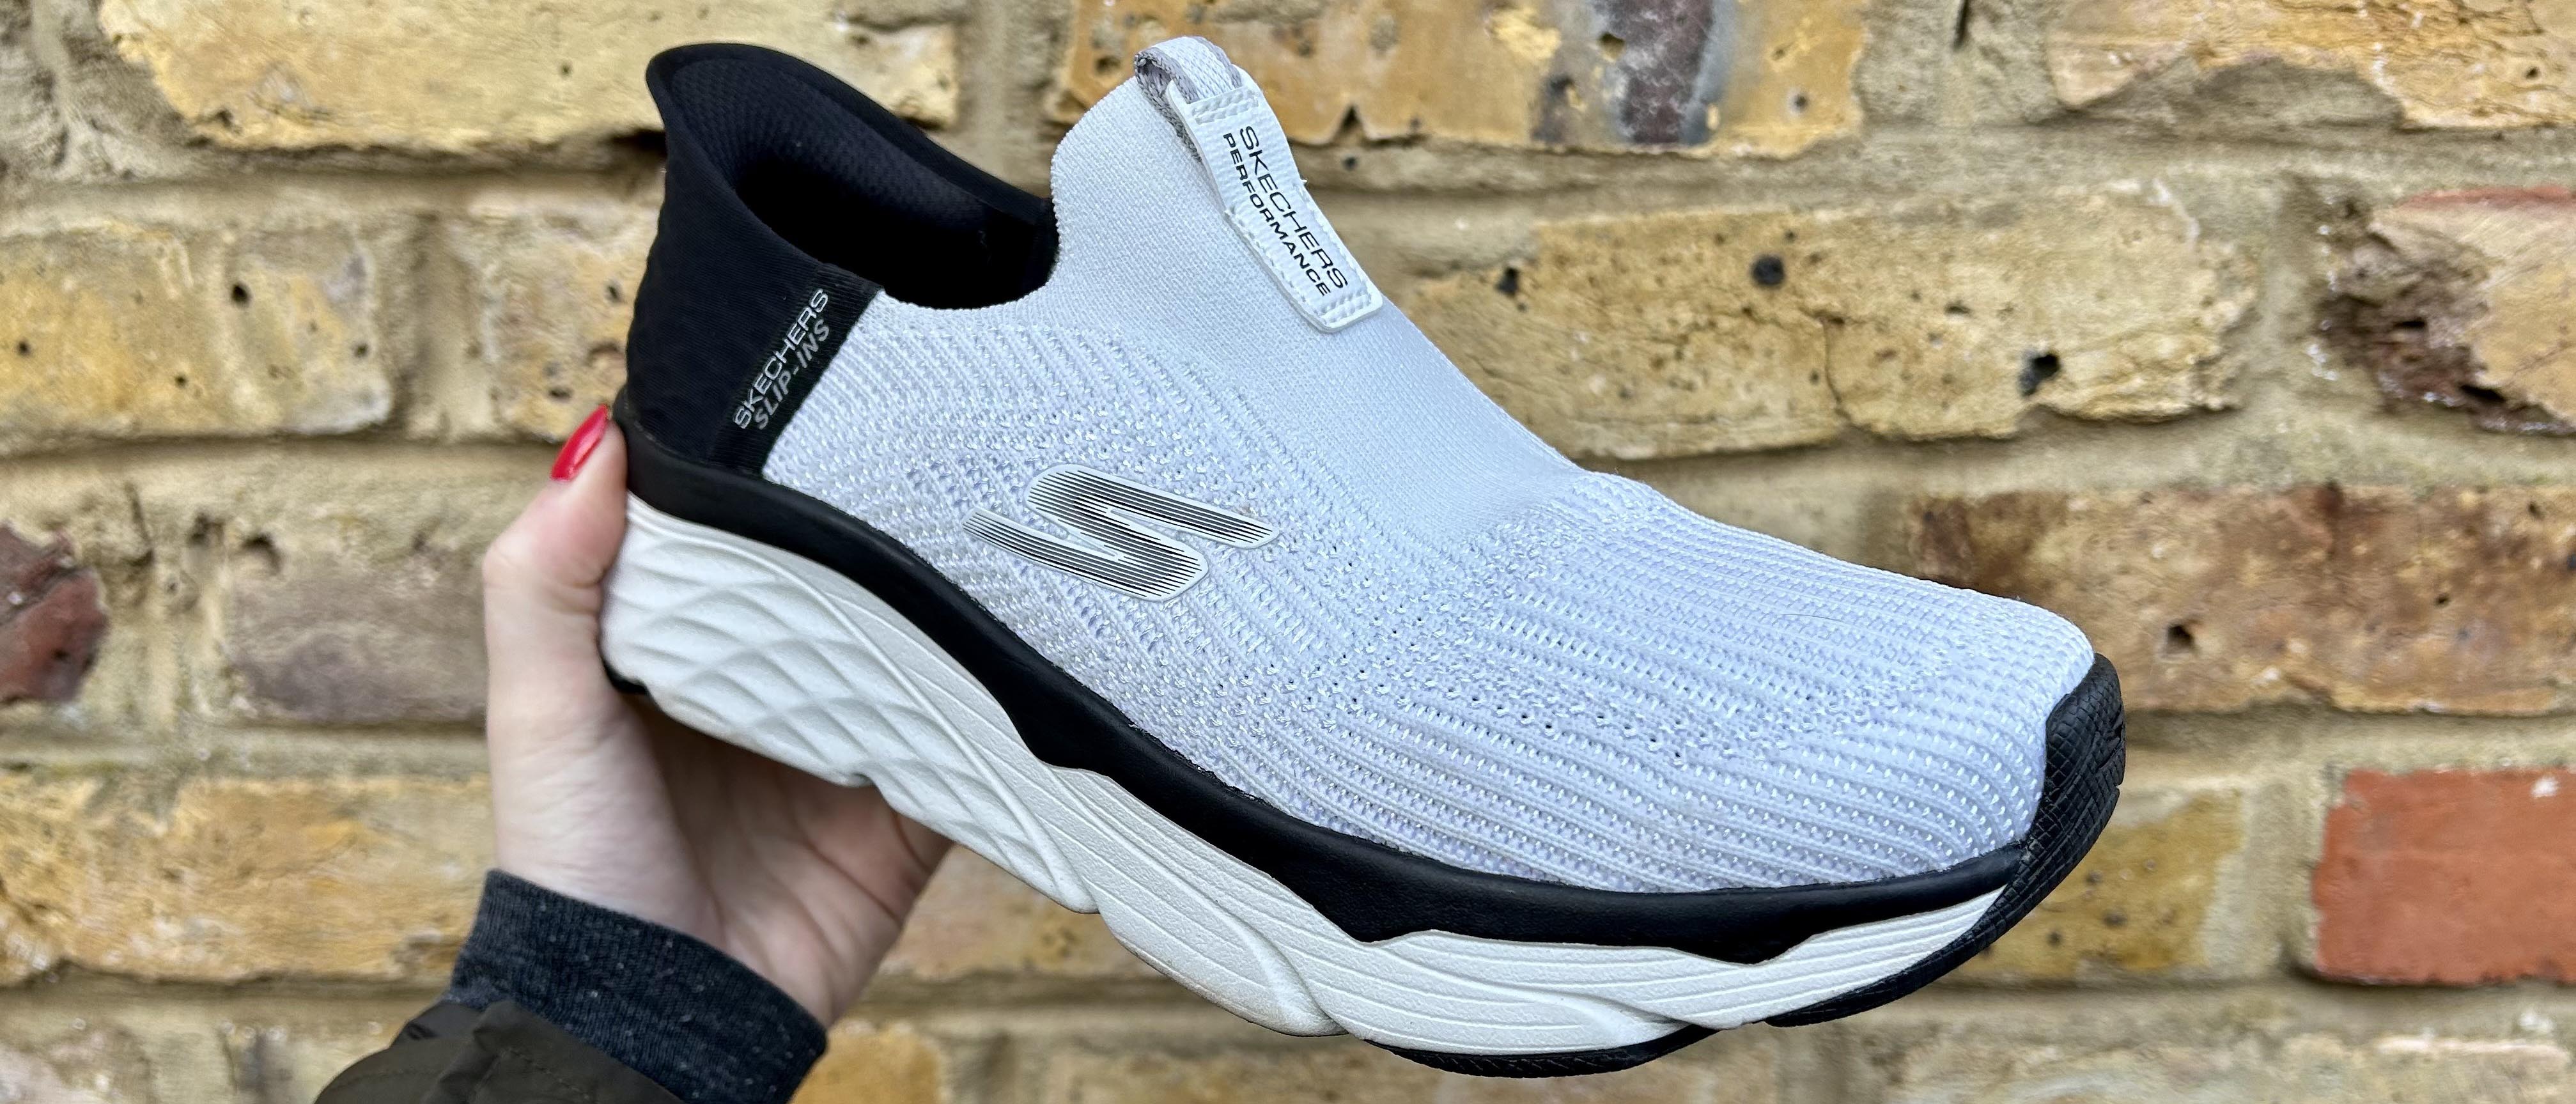 Reino Pato aprobar I walked 100 miles in the Skechers slip-on shoes — here's my verdict |  Tom's Guide